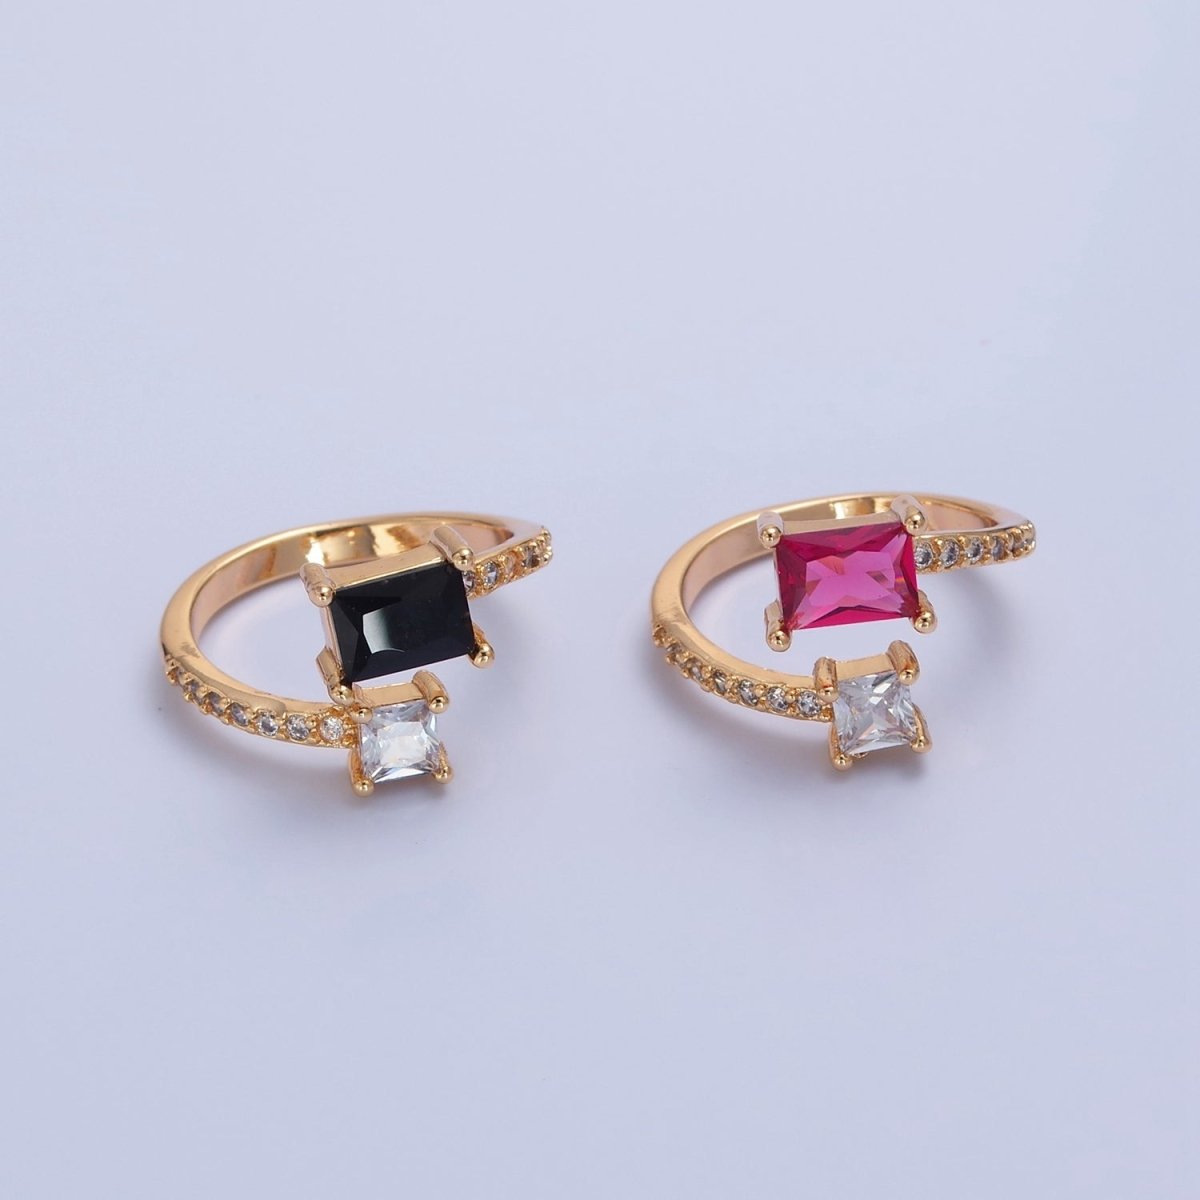 Gold Black Emerald Cut Ring Pink CZ Ring Adjustable Jewelry O-2242 O-2243 - DLUXCA